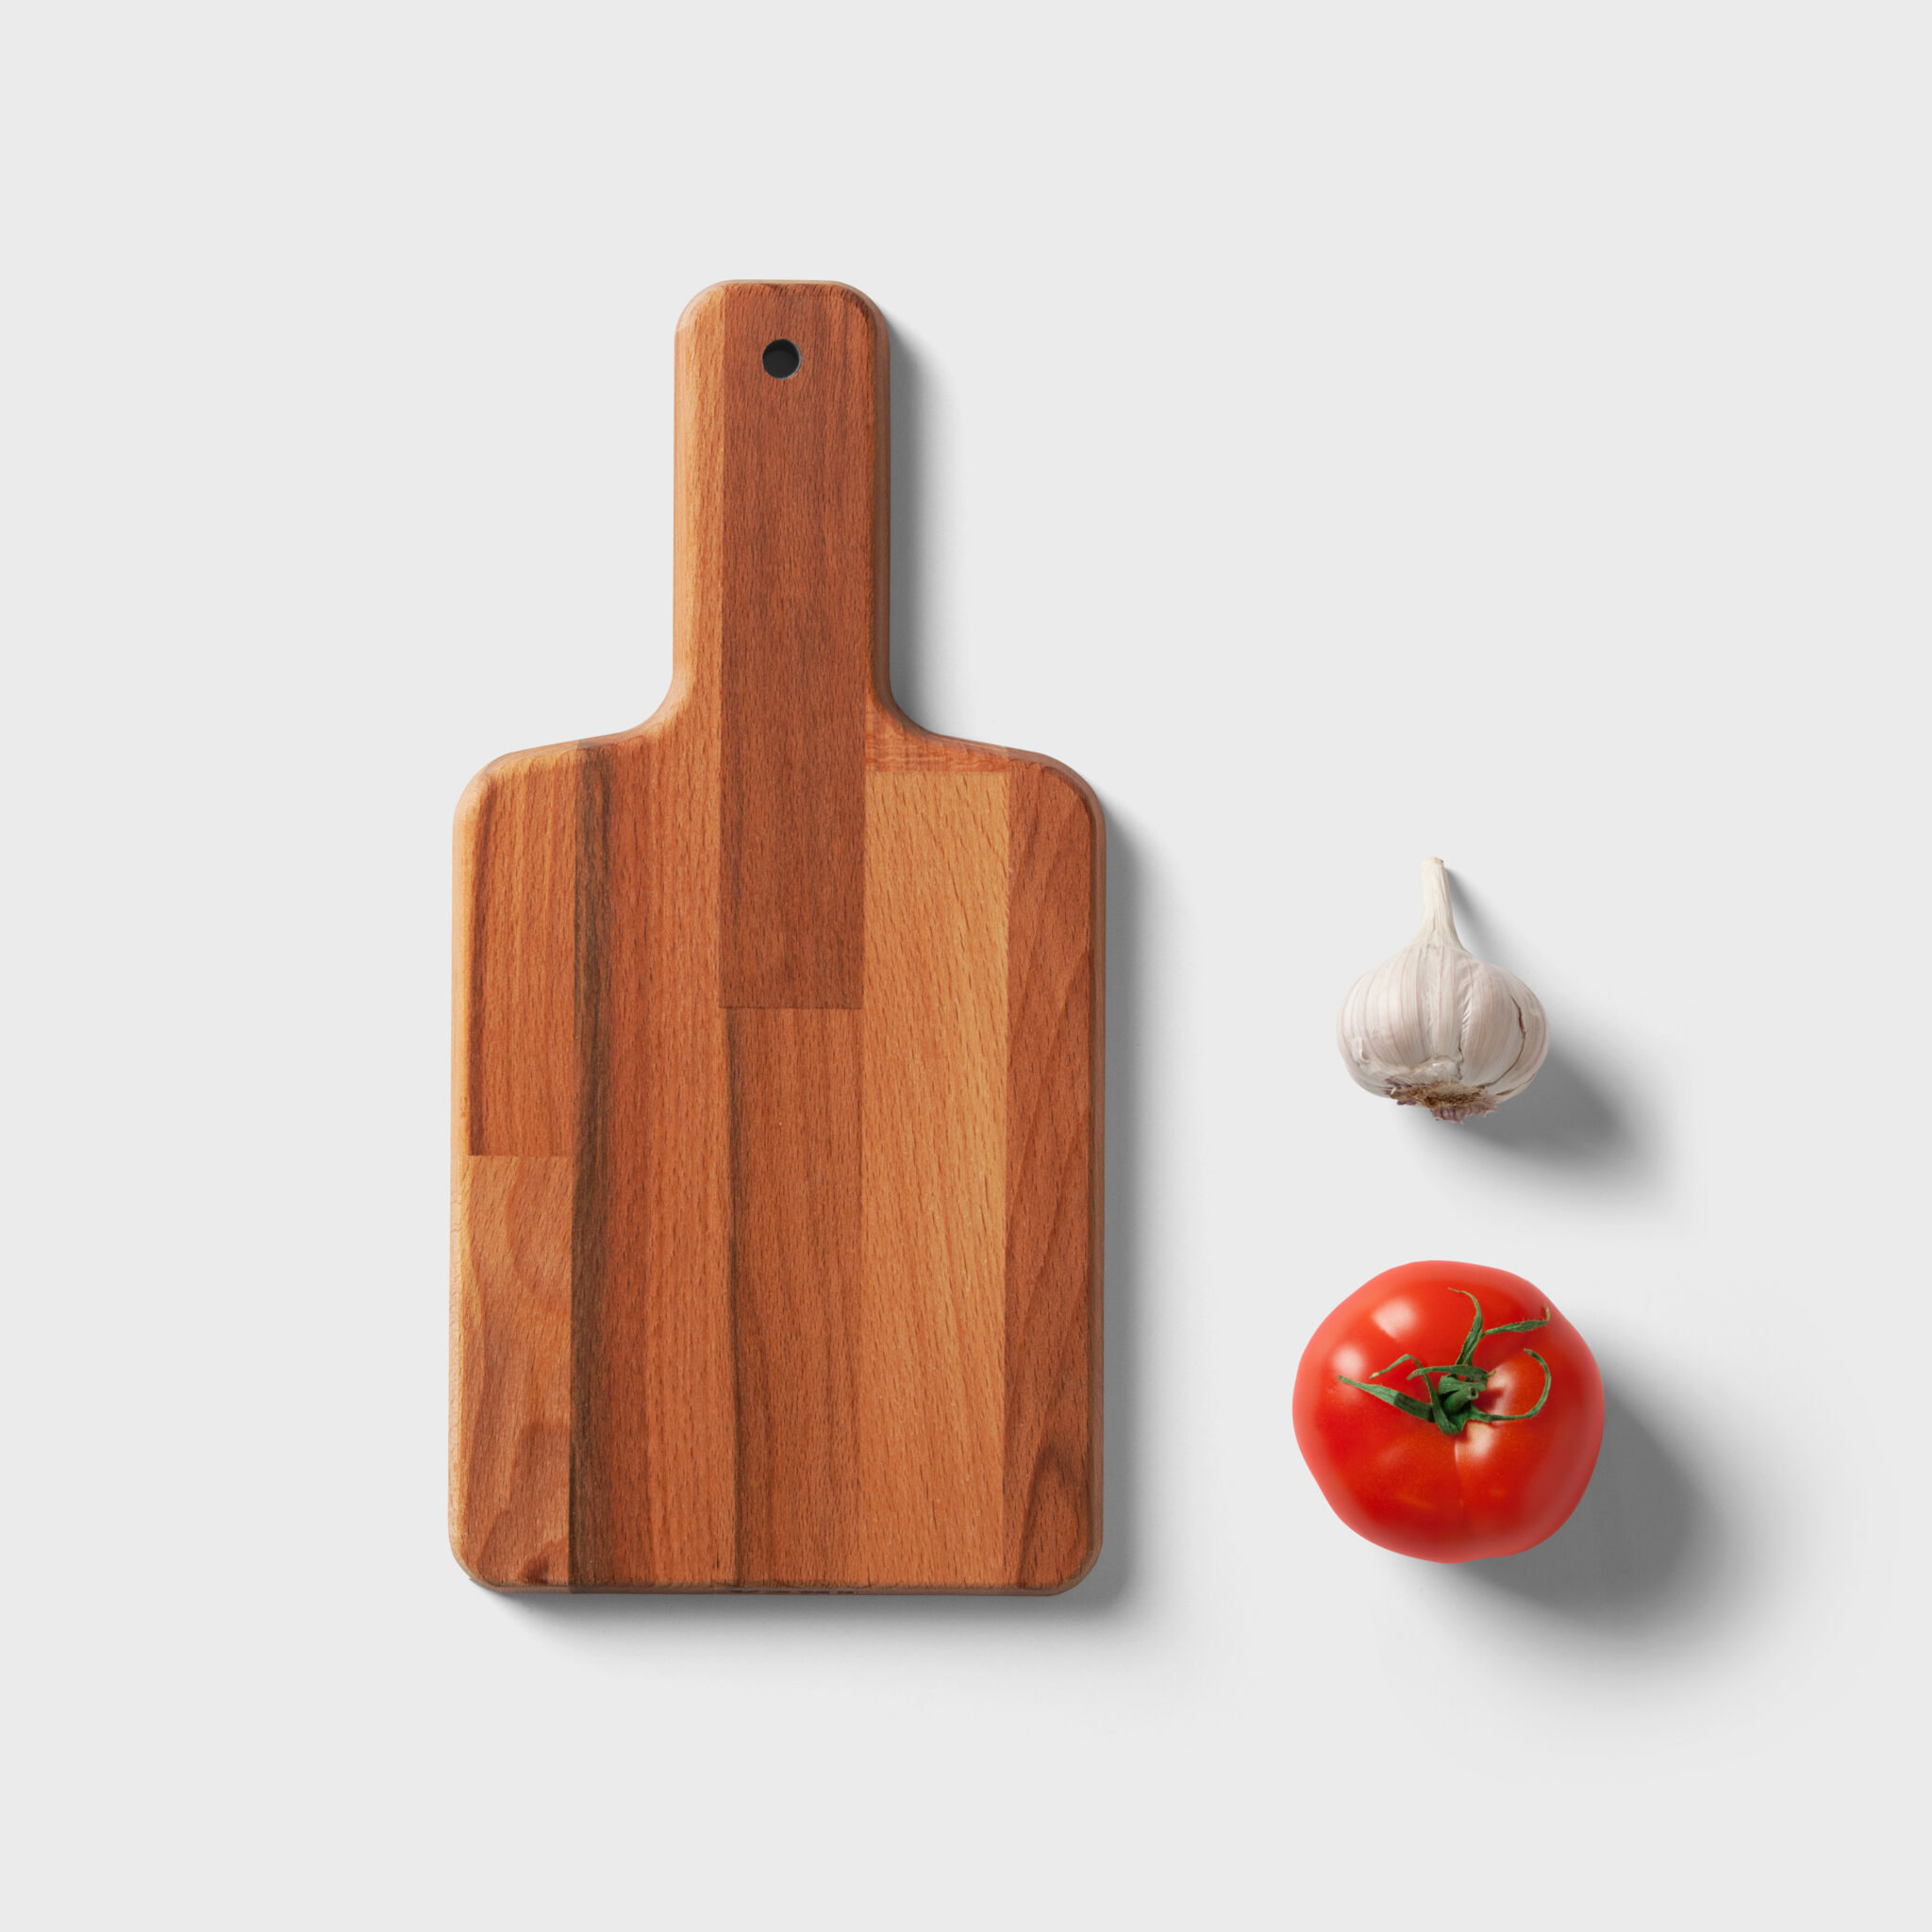 Top View of Small Wooden Board Mockup FREE PSD